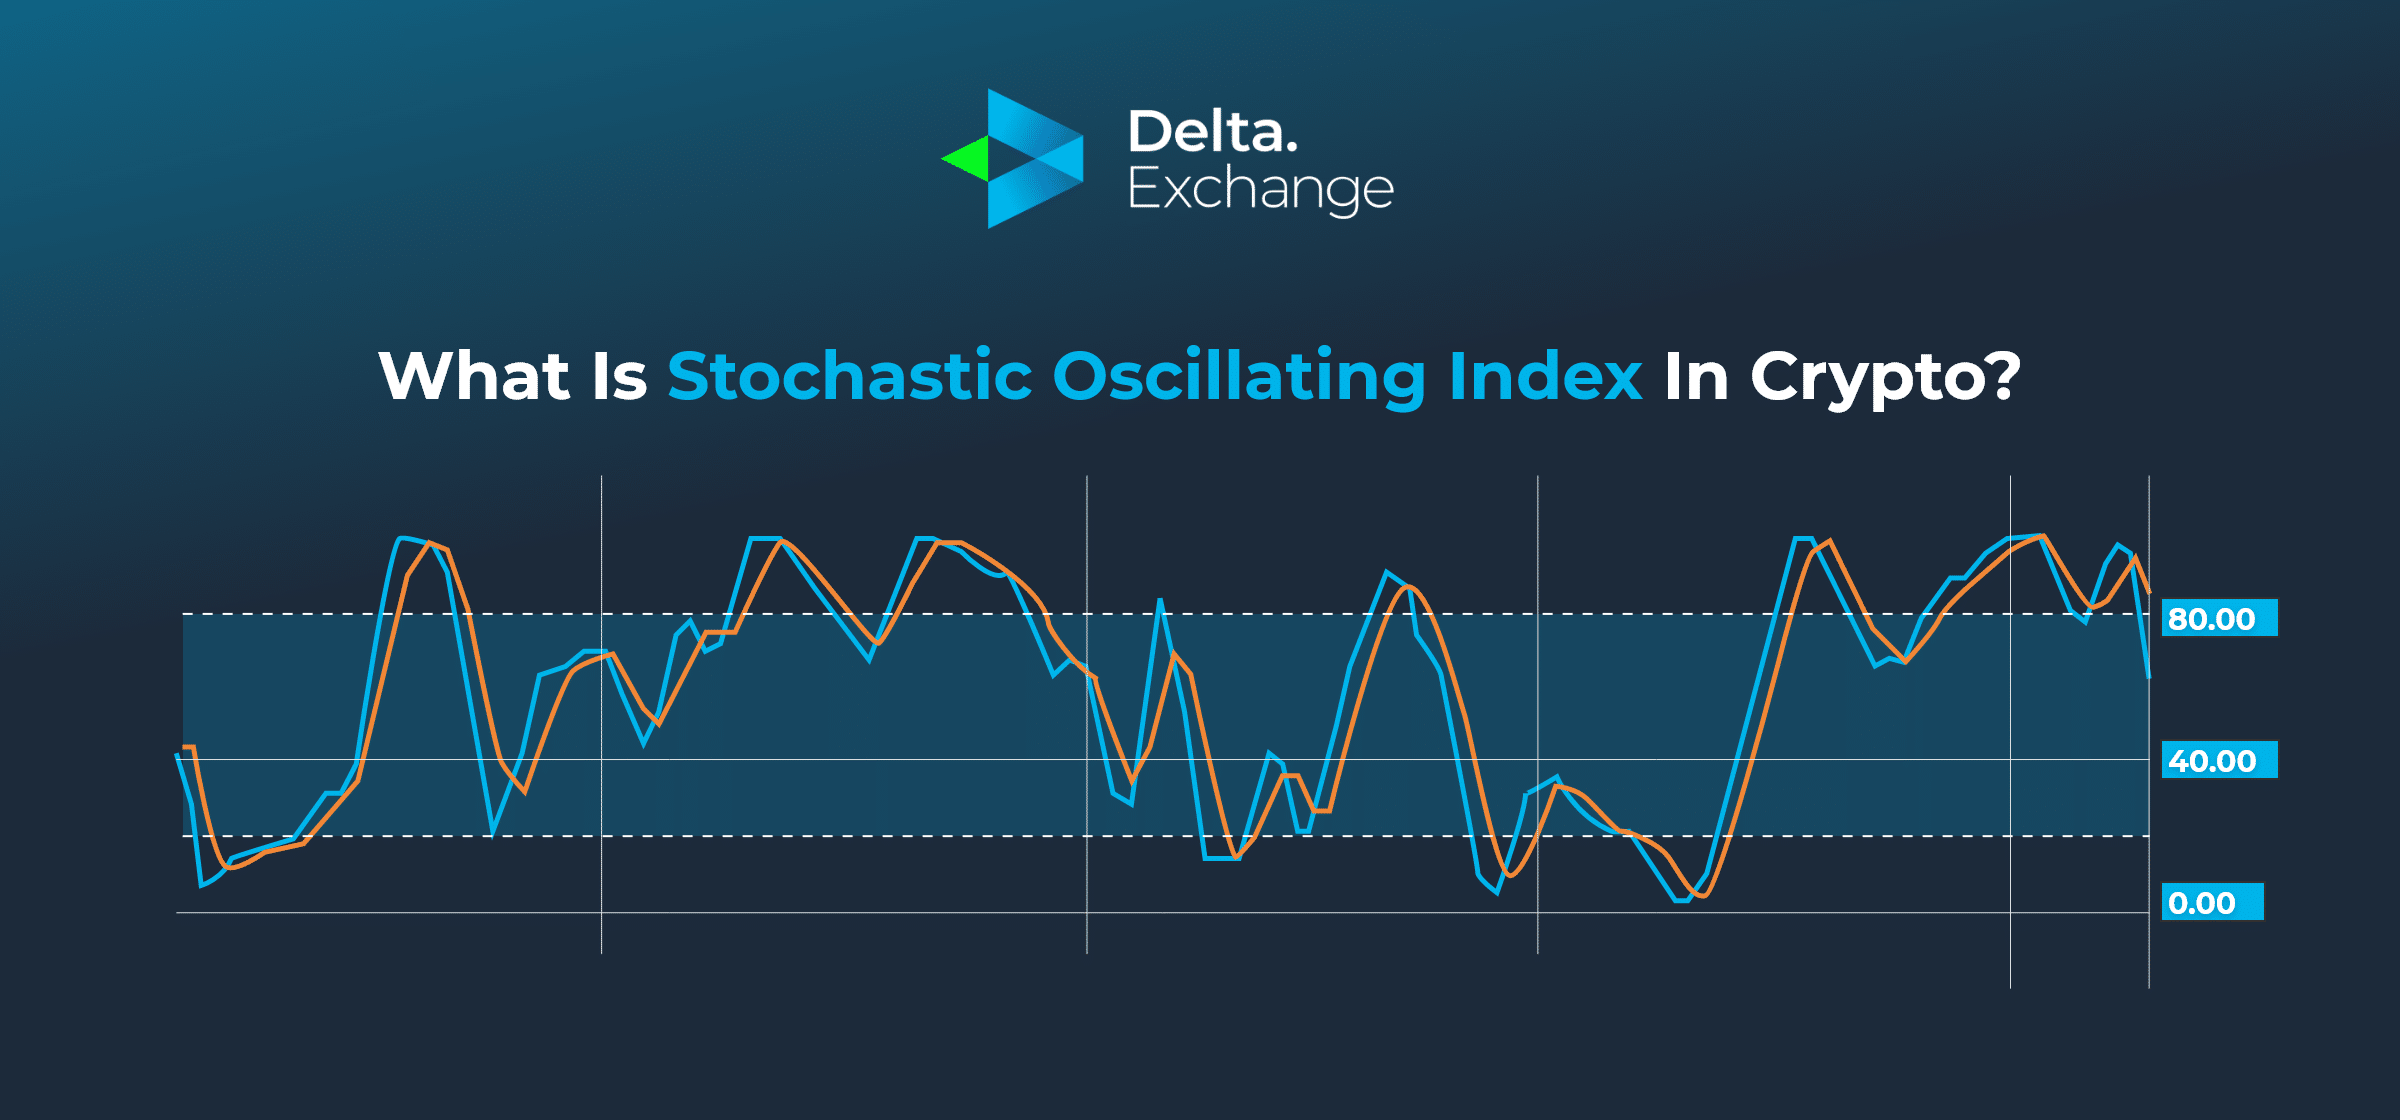 how to trade using Stochastic Oscillating Index?